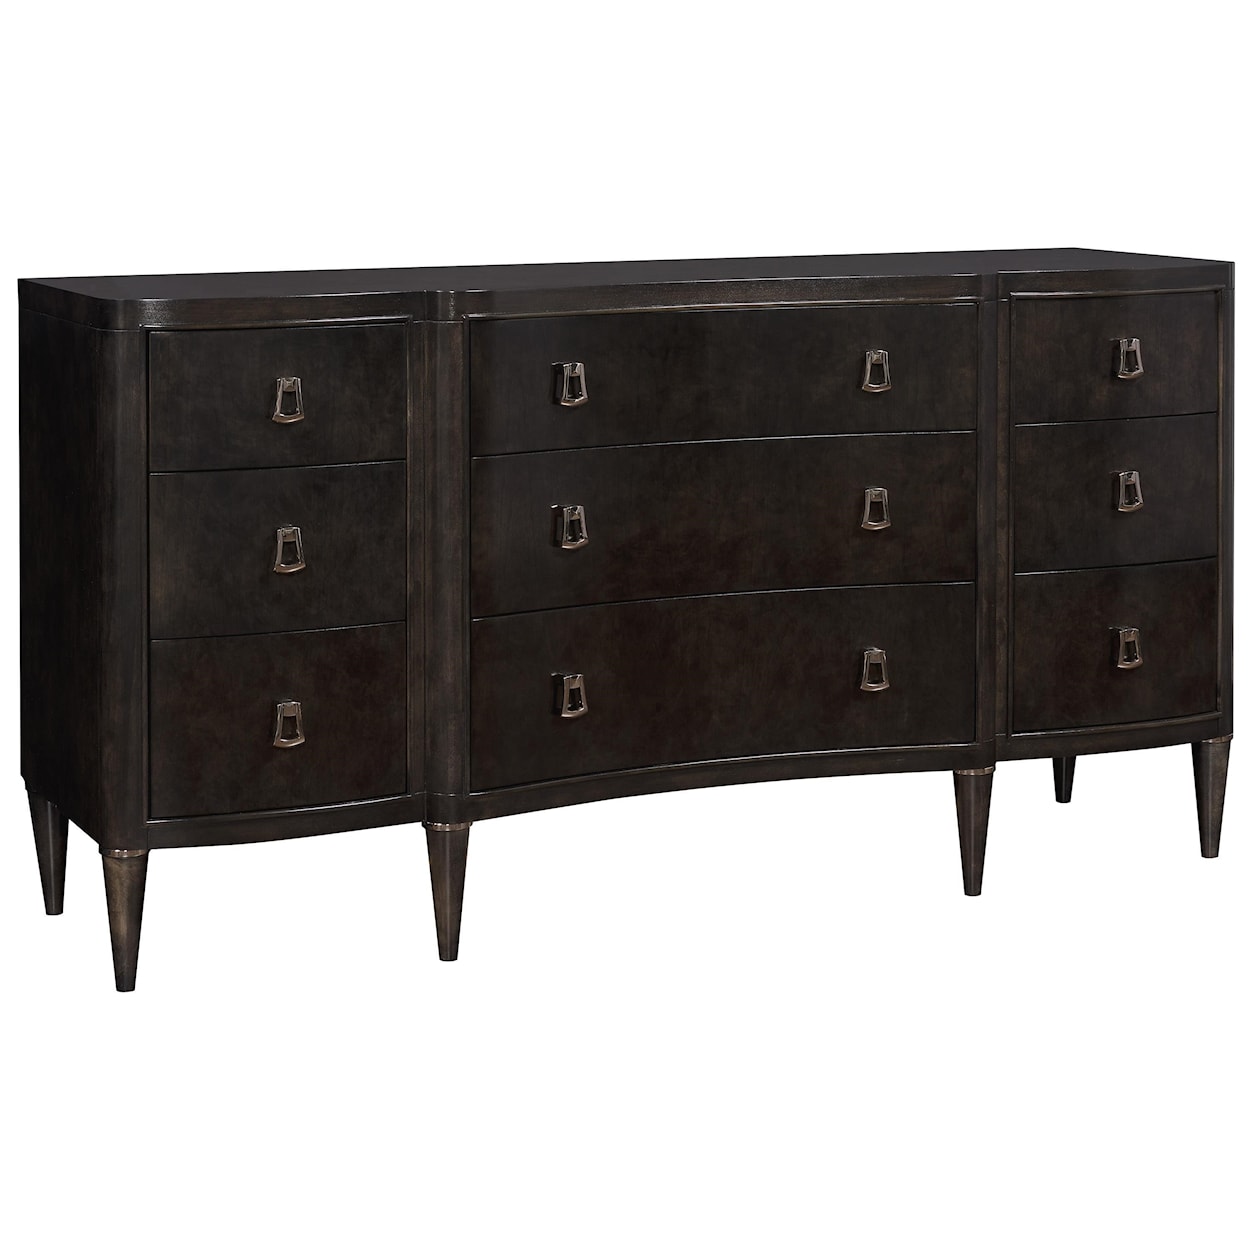 Vanguard Furniture Lillet Chest of Drawers